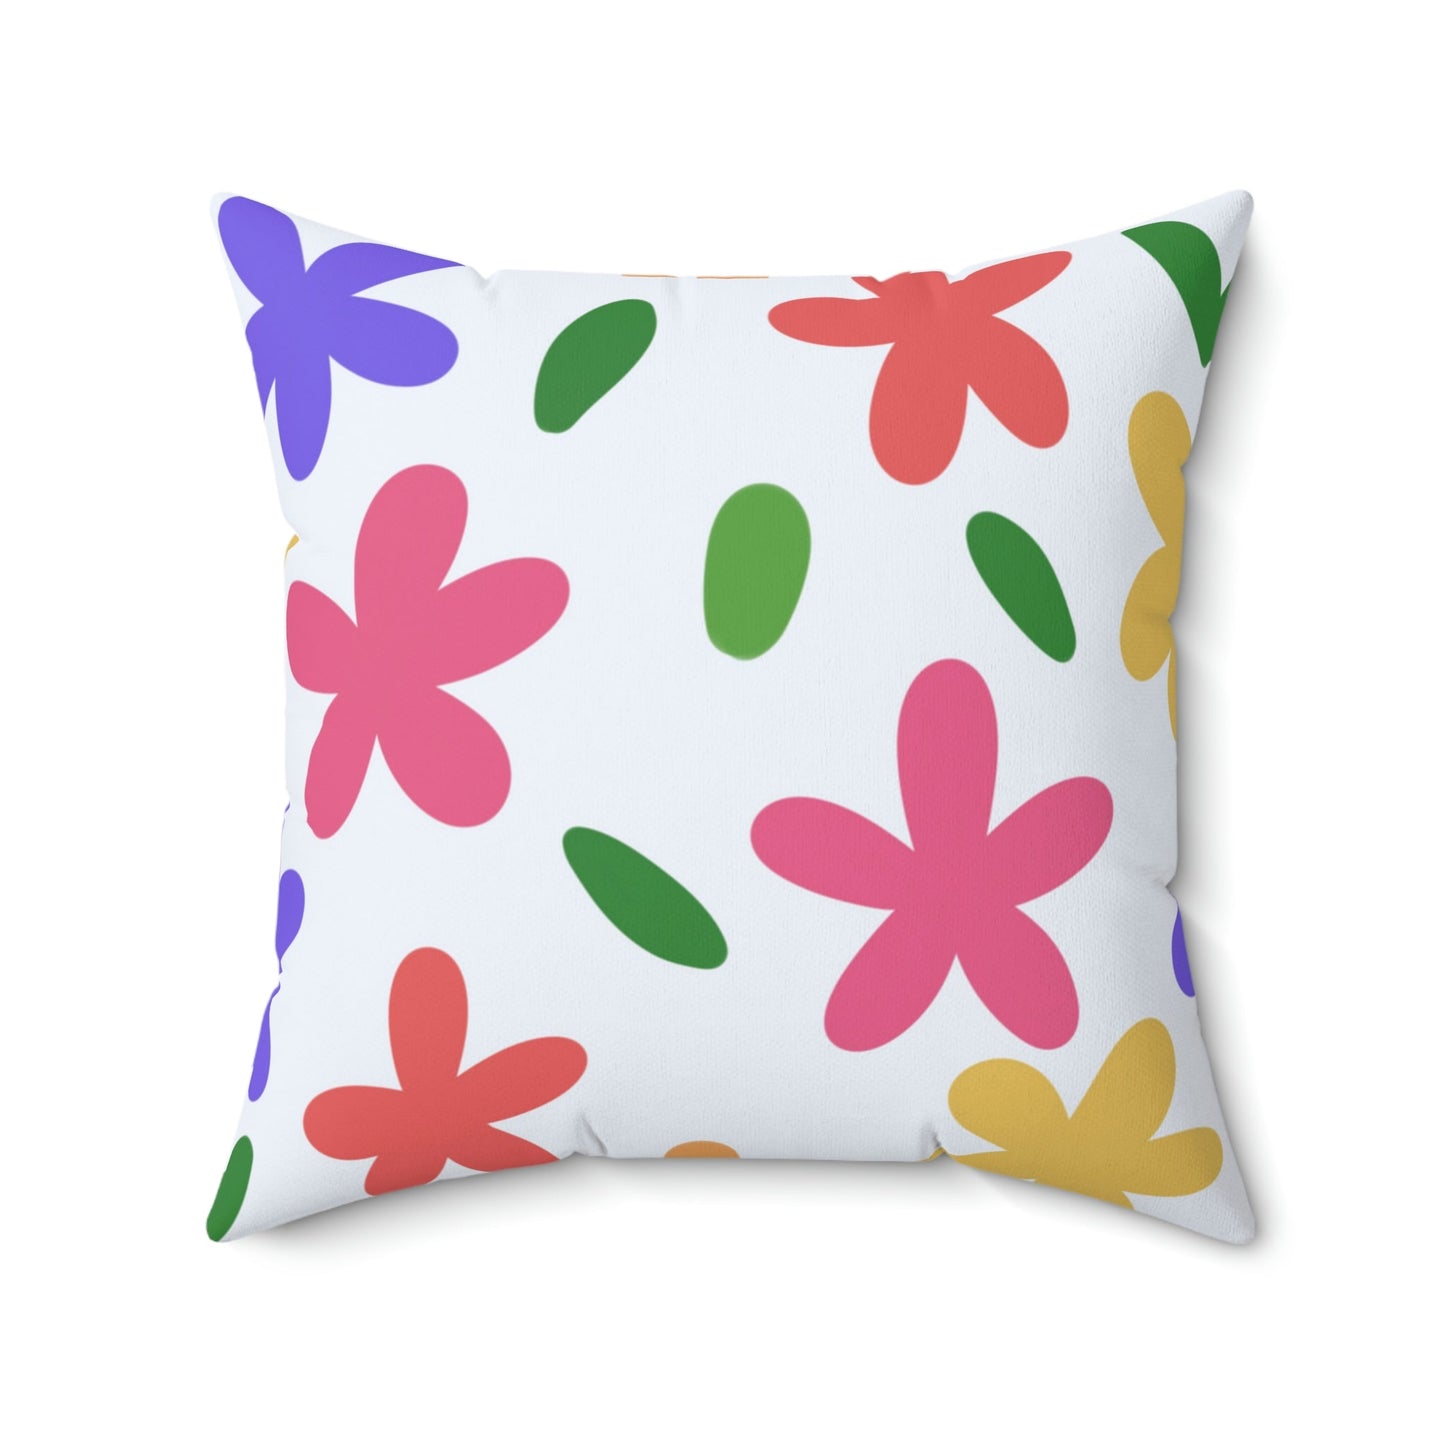 Cute Flowers in Bloom Square Pillow Home Decor Pink Sweetheart